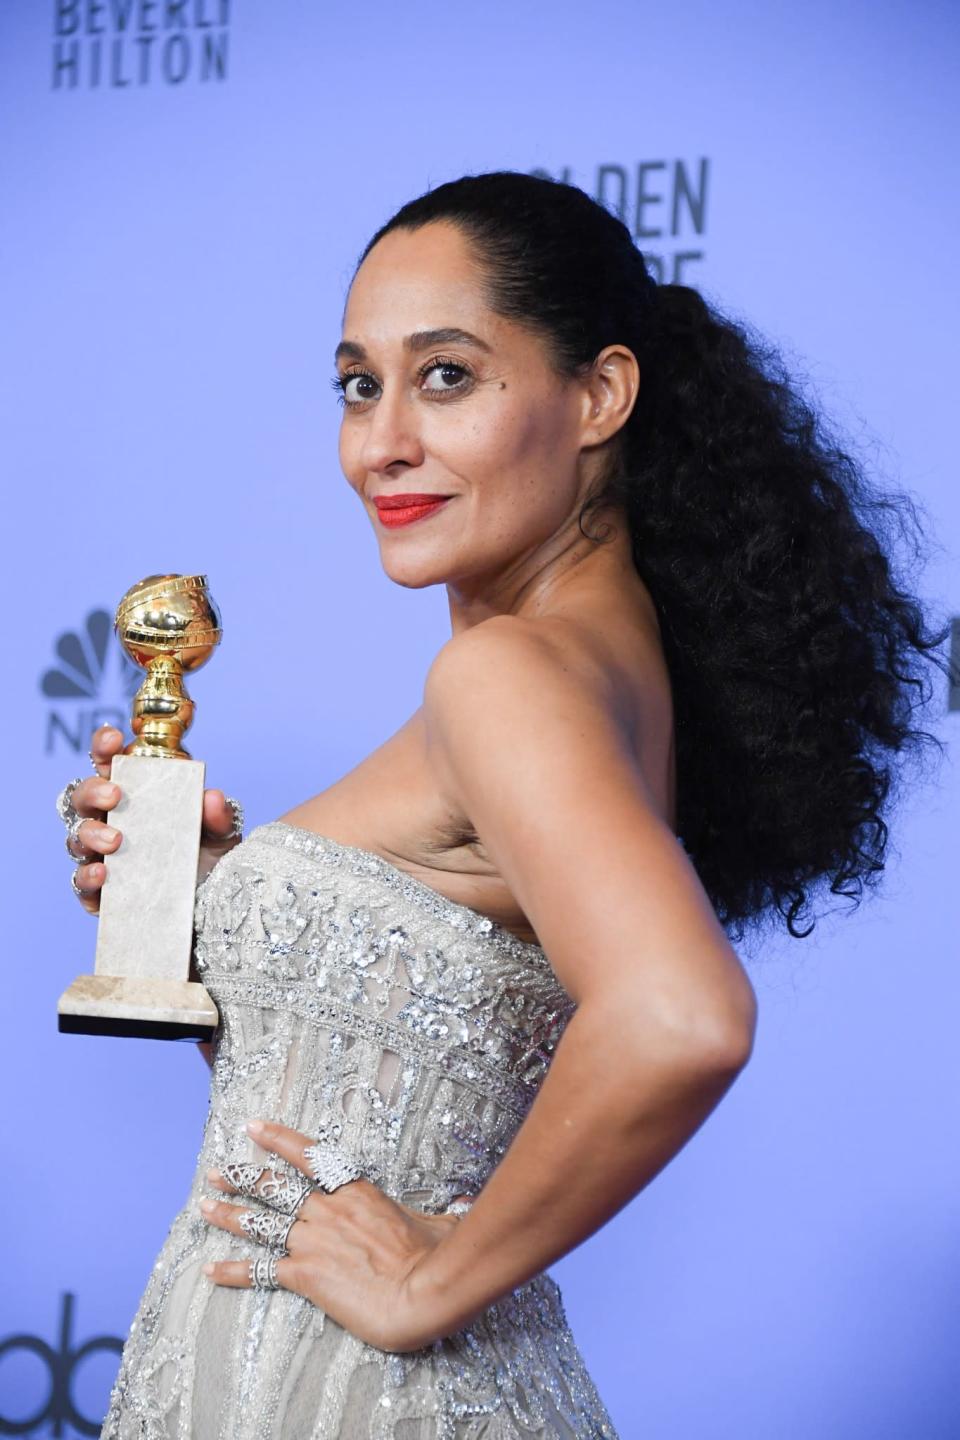 <p>Golden Globe Award winner Tracee Ellis Ross shined in the spotlight with her textured low ponytail, fresh skin (using Kiehl’s skincare products!), and red-orange lip. To recreate this bold lip color, mix <a rel="nofollow noopener" href="http://www.lorealparisusa.com/products/makeup/lip-color/lipstick/infallible-lip-paints.aspx?&shade=Orange-Envy-322" target="_blank" data-ylk="slk:L'Oréal Paris Infallible Paint Lip" class="link ">L'Oréal Paris Infallible Paint Lip</a> ($10) in #322 and #324 and brush it onto your lips. (Photo: Getty Images) </p>